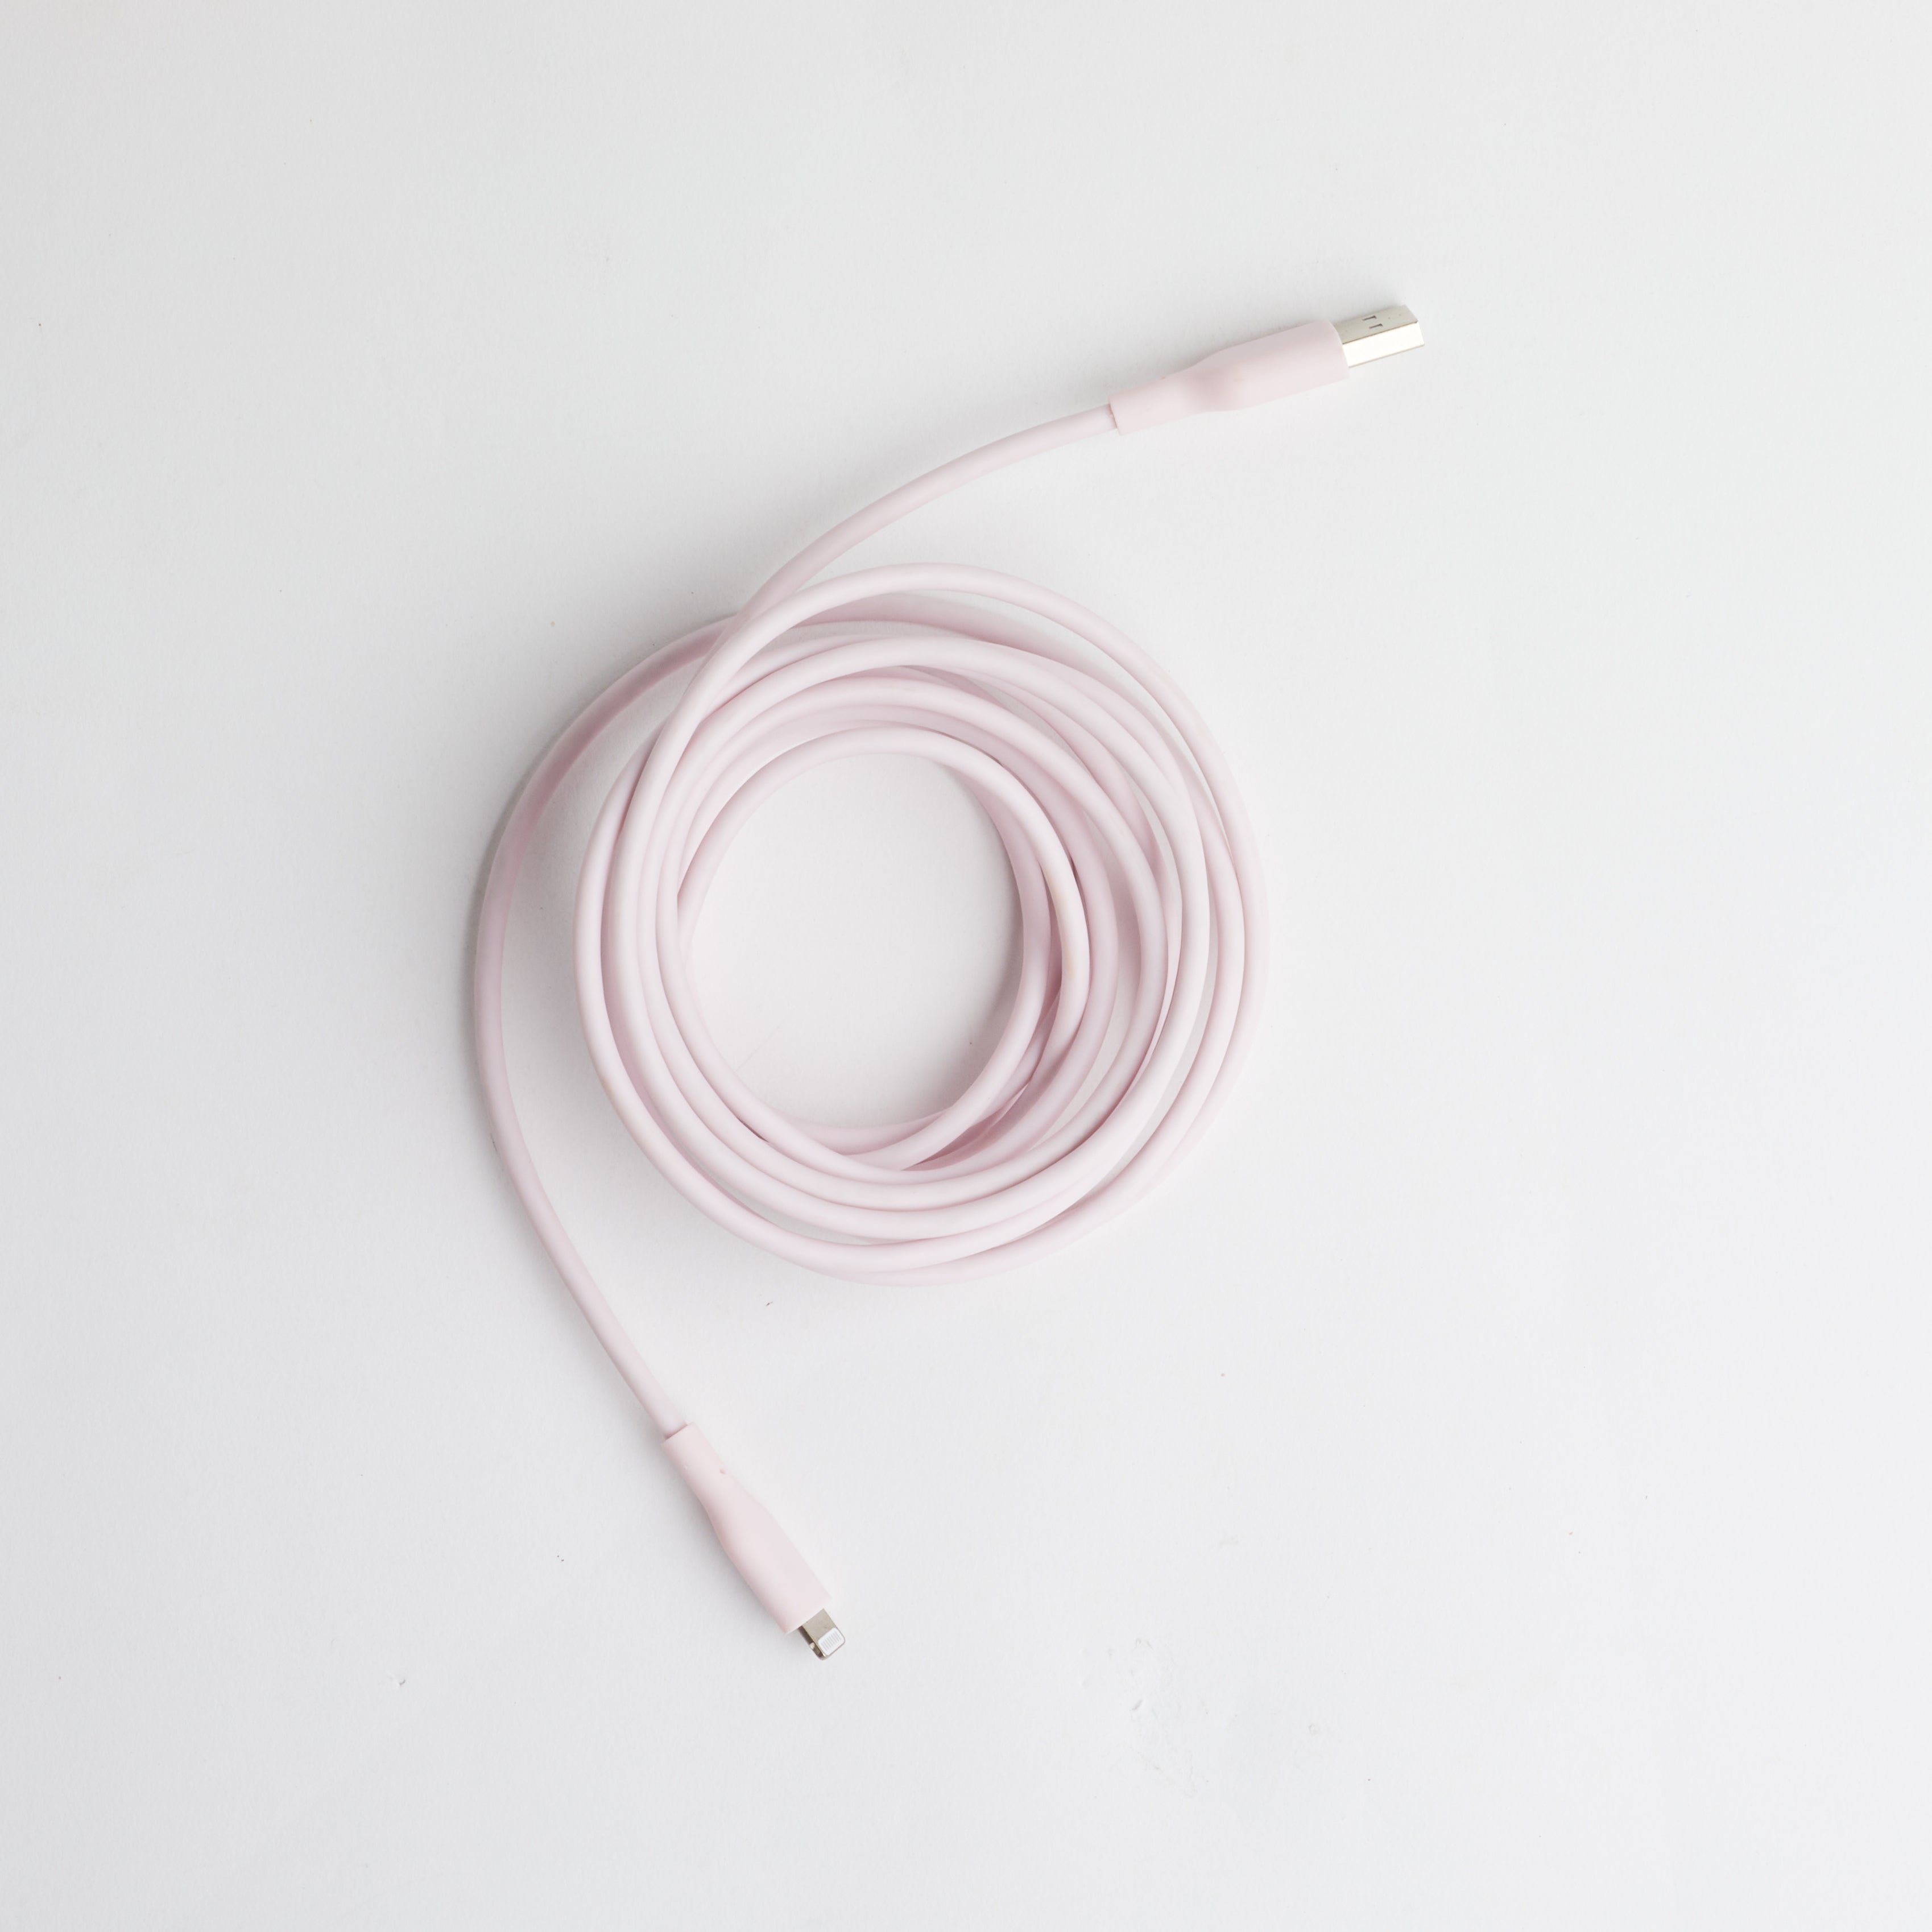 Coil of pink phone charging cable